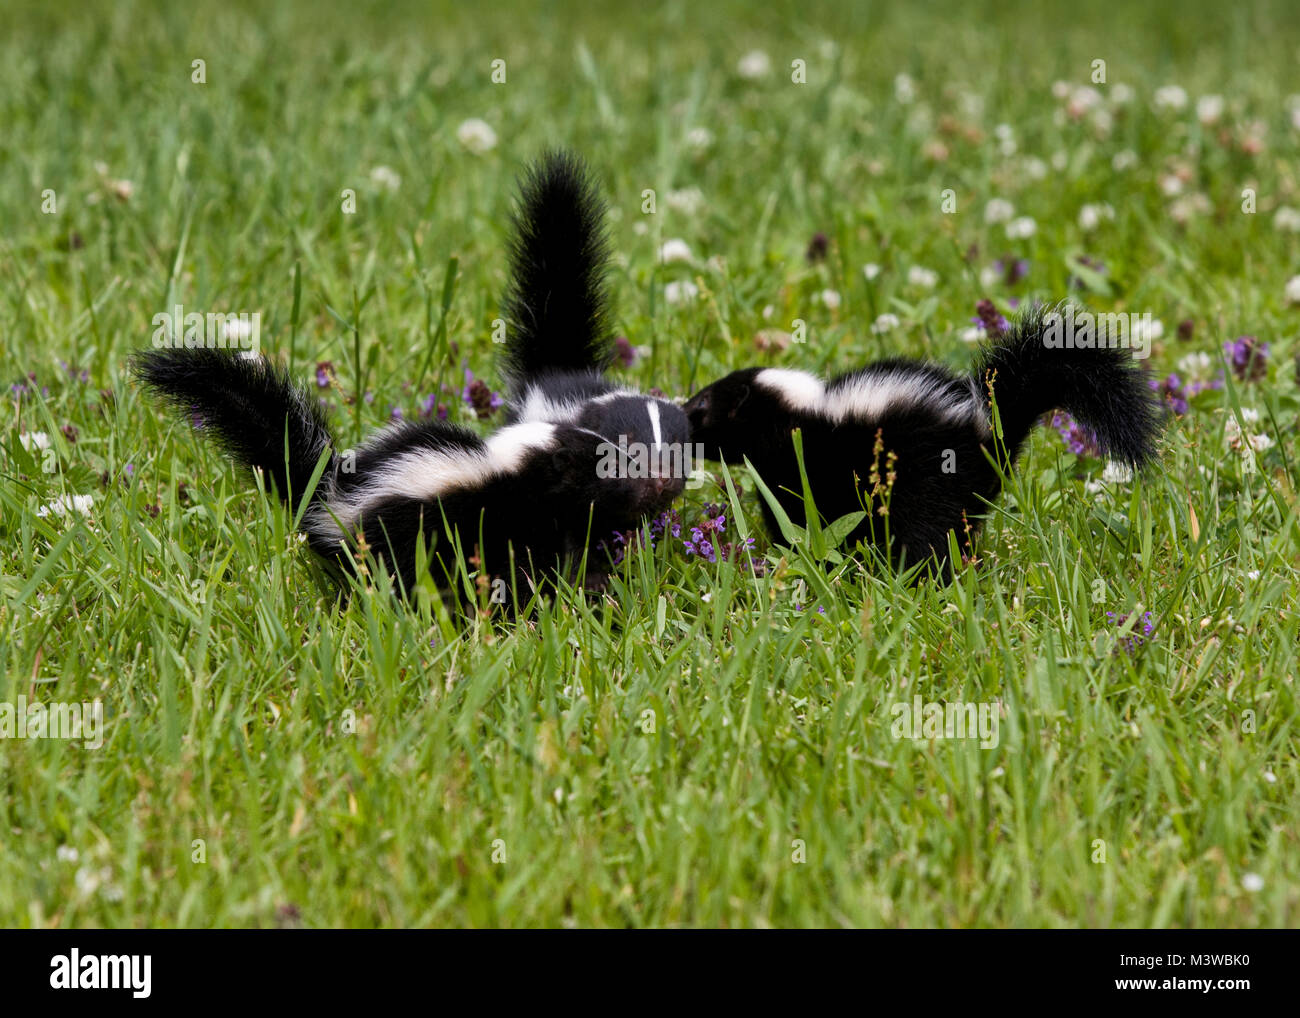 Three Baby Skunks with Their Noses Together Stock Photo